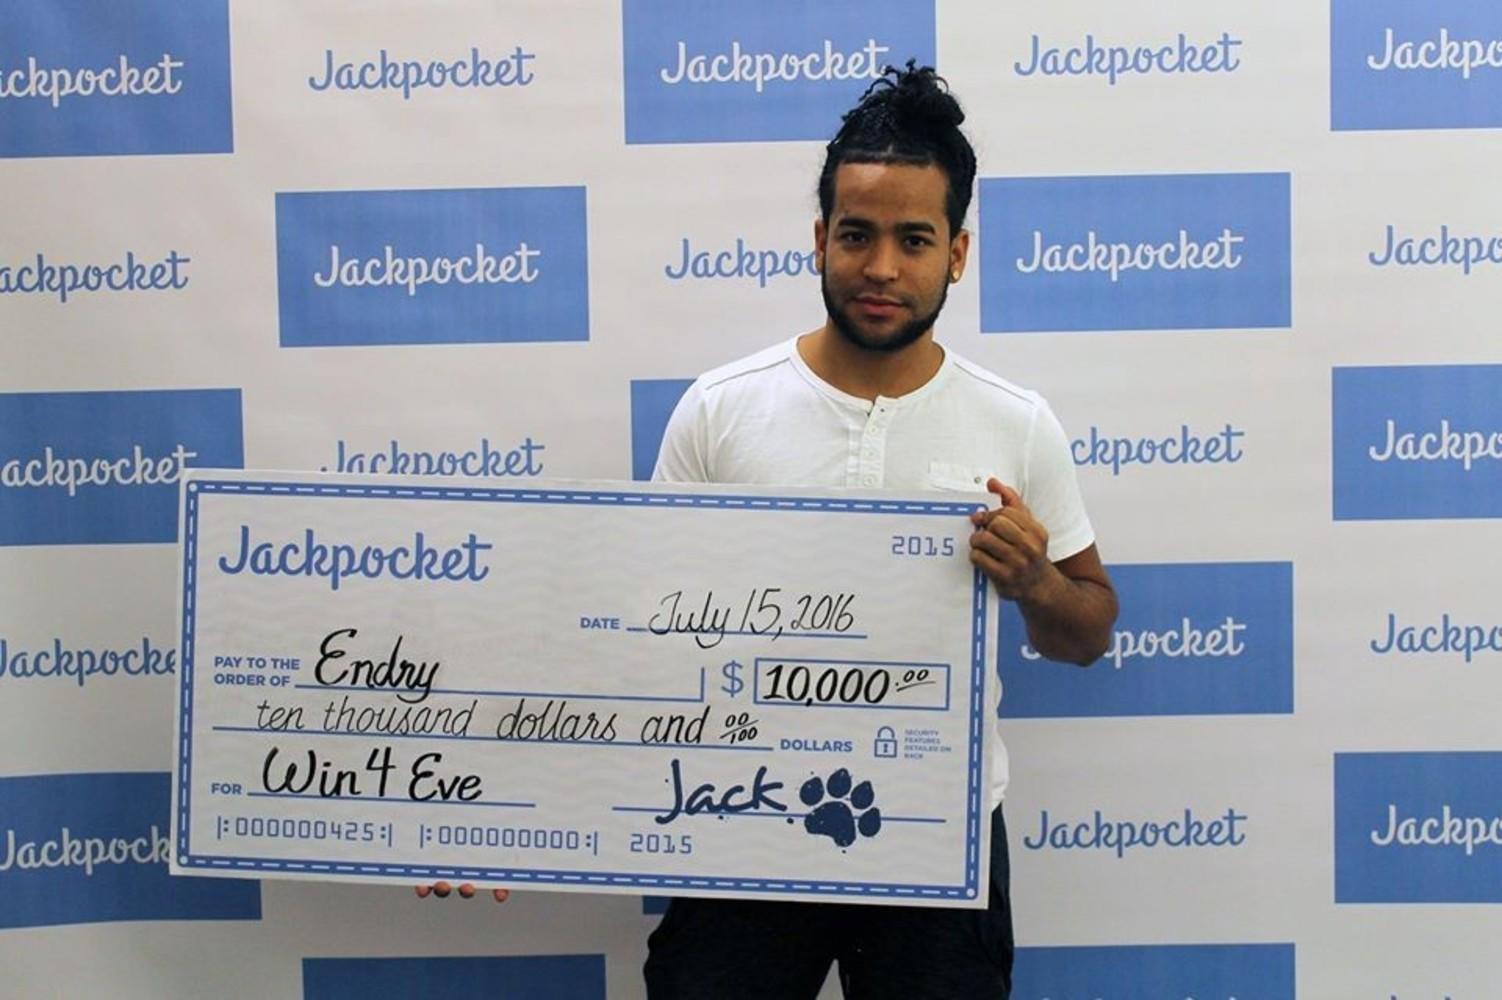 Endry won $10,000 playing Win 4 Eve